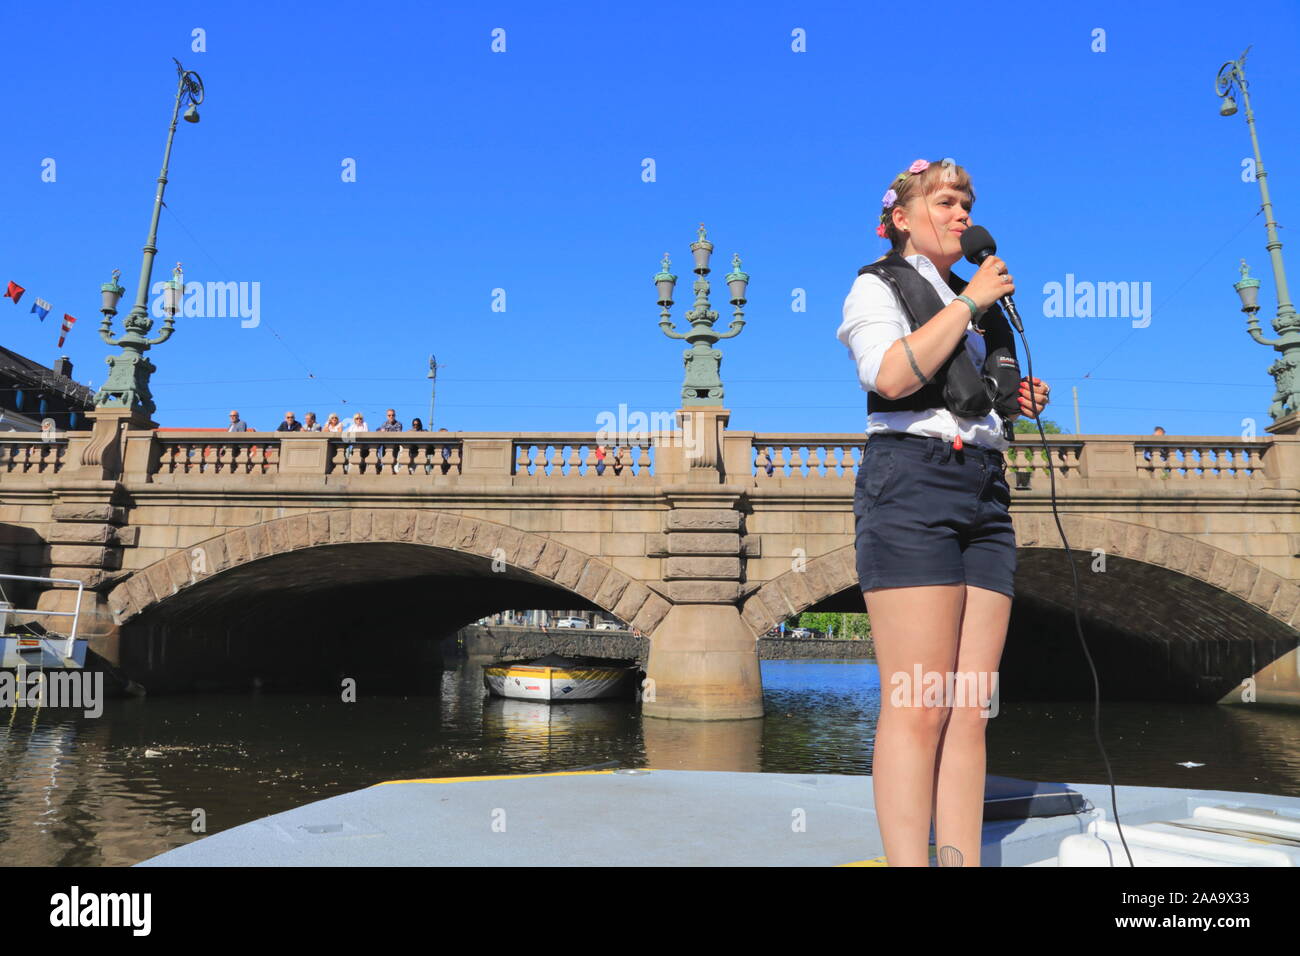 A tour guide provides information to tourists on the sightseeing boat Paddan in Gothenburg city, Sweden, while people look on from a bridge. Stock Photo